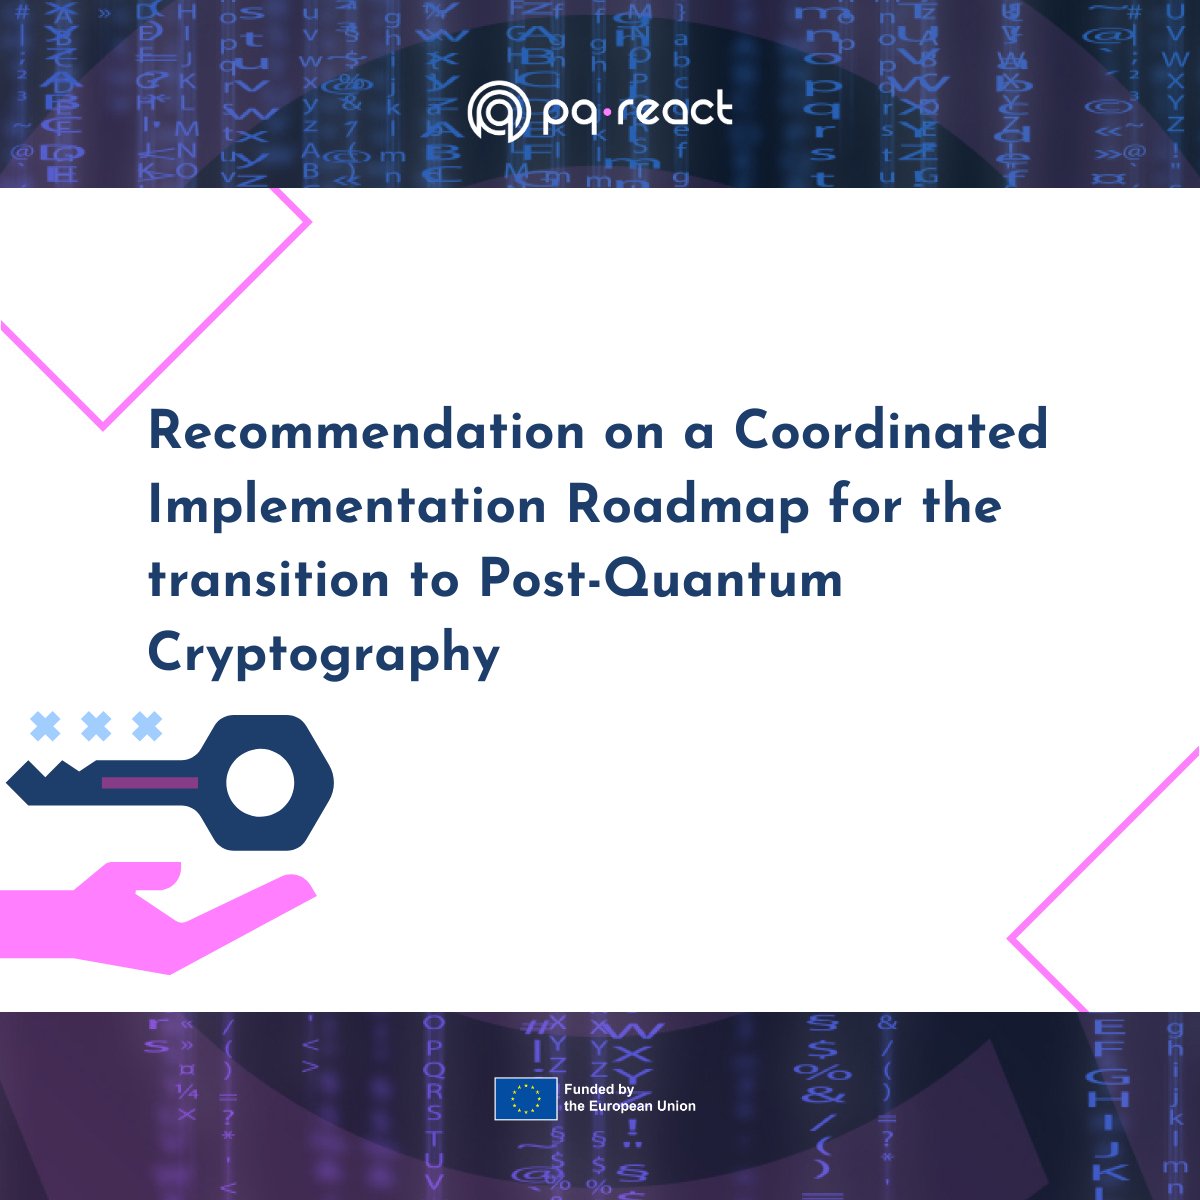 📢 Report alert!
📝The Commission has published a Recommendation on Post-Quantum #Cryptography to encourage Member States to develop and implement a harmonised approach as the EU transitions↪to post-quantum cryptography!
Learn more!🔗 rb.gy/ixl0tq
#pqreact #QuantumDay